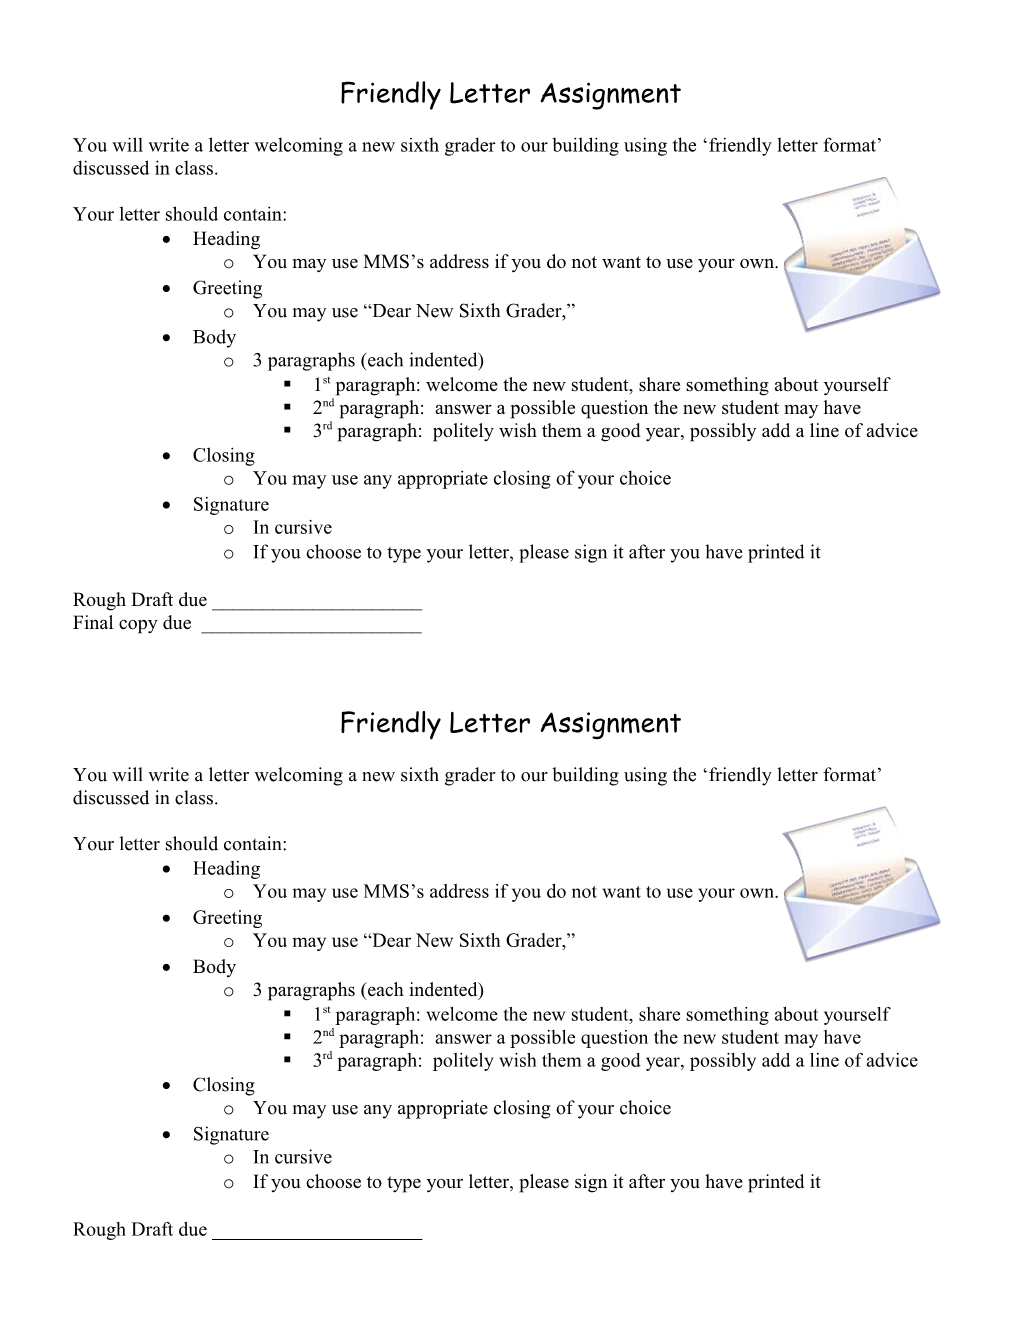 Friendly Letter Assignment